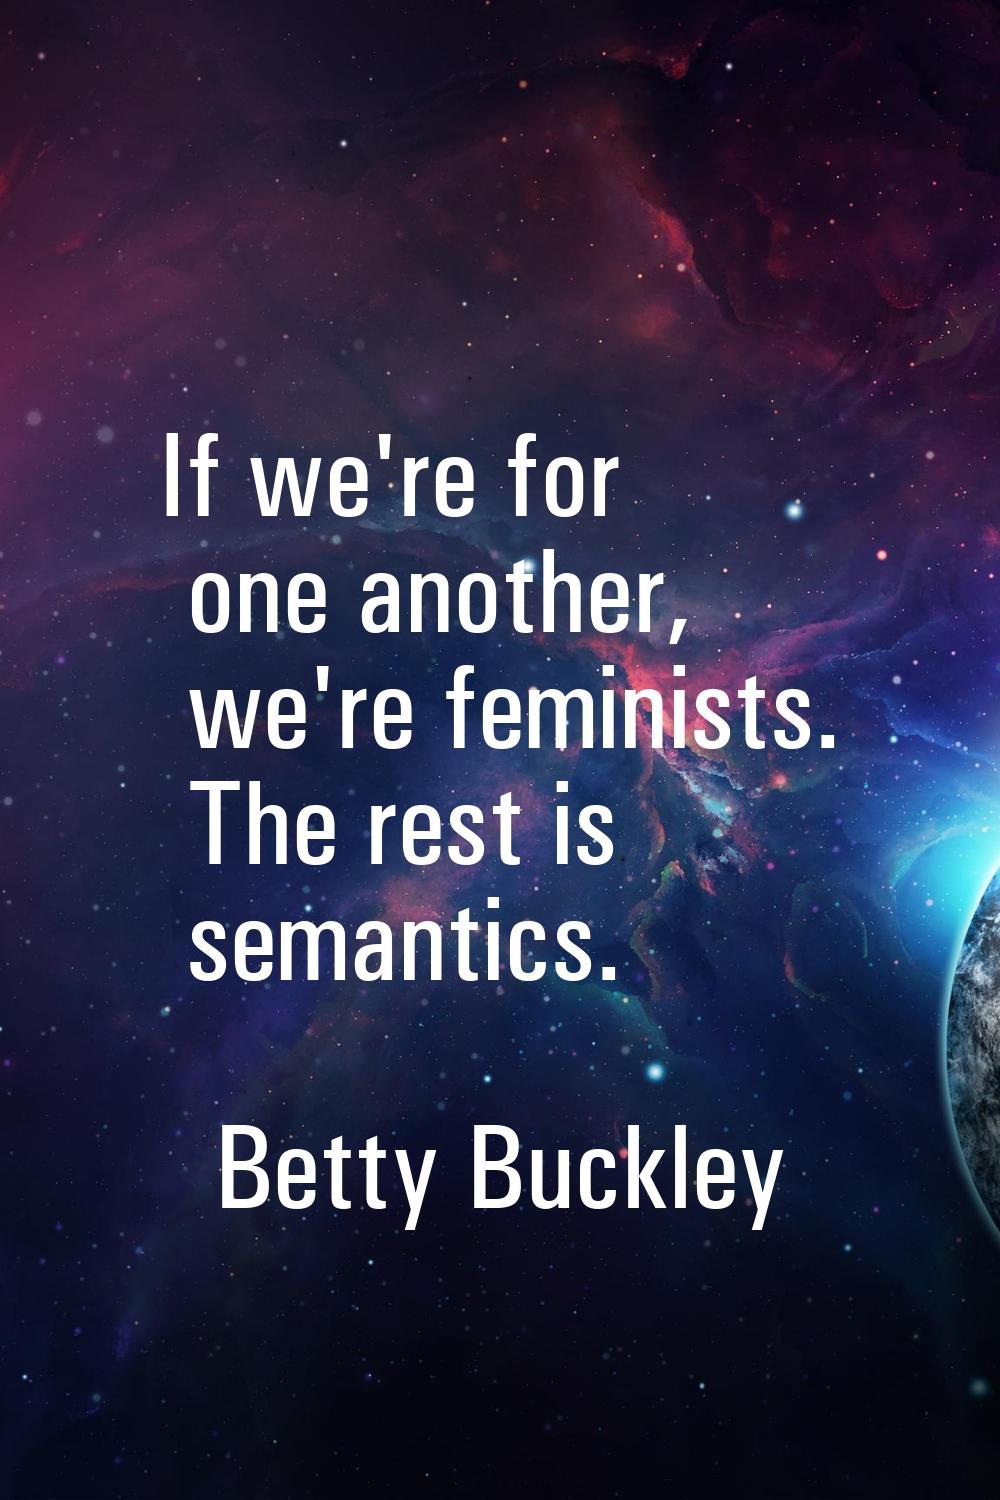 If we're for one another, we're feminists. The rest is semantics.